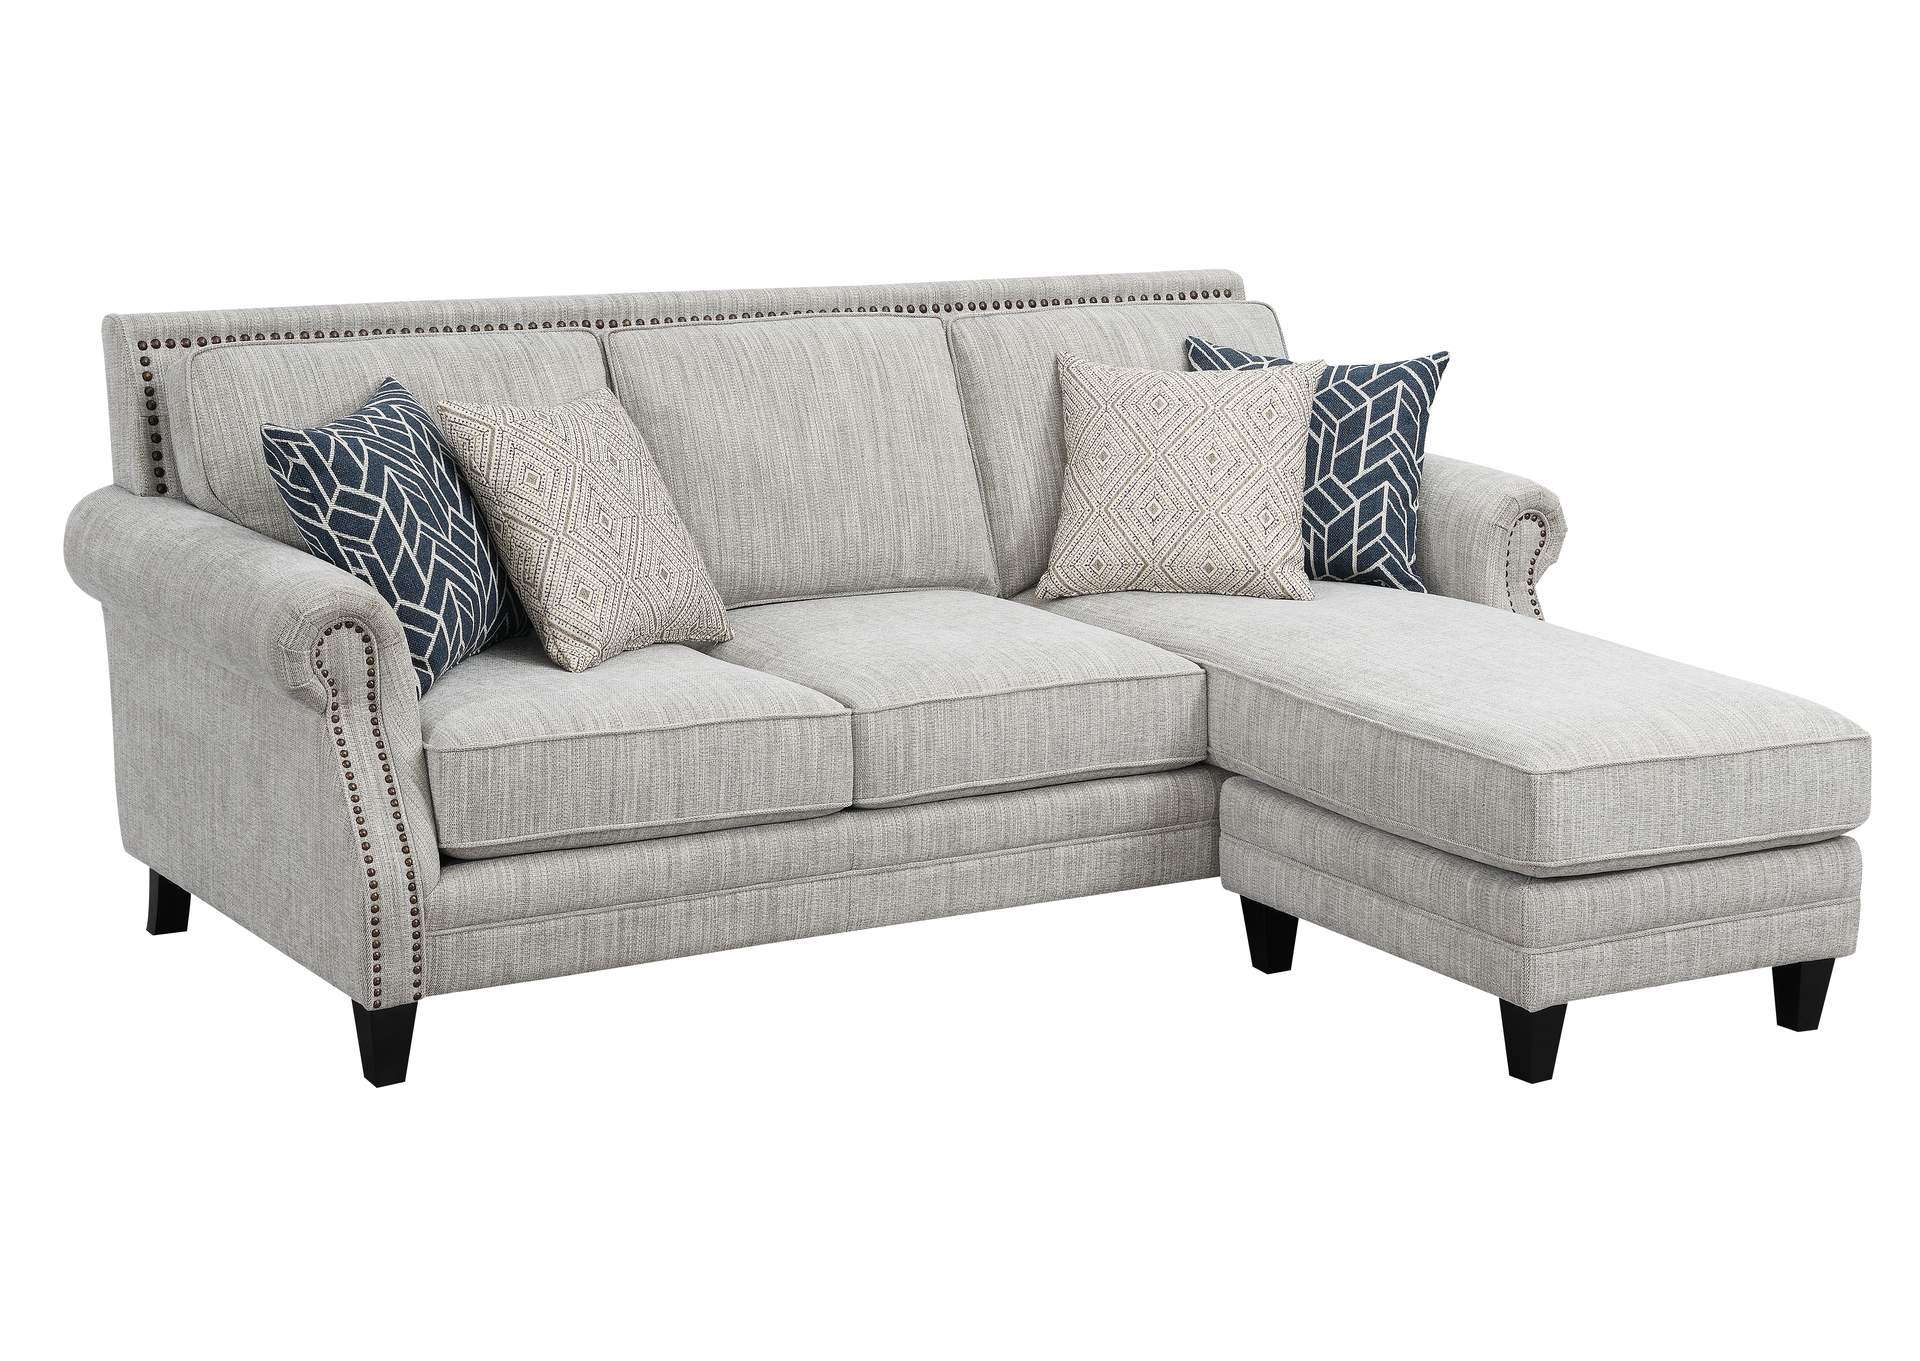 Trilogy Reversible Chaise Sectional,Emerald Home Furnishings